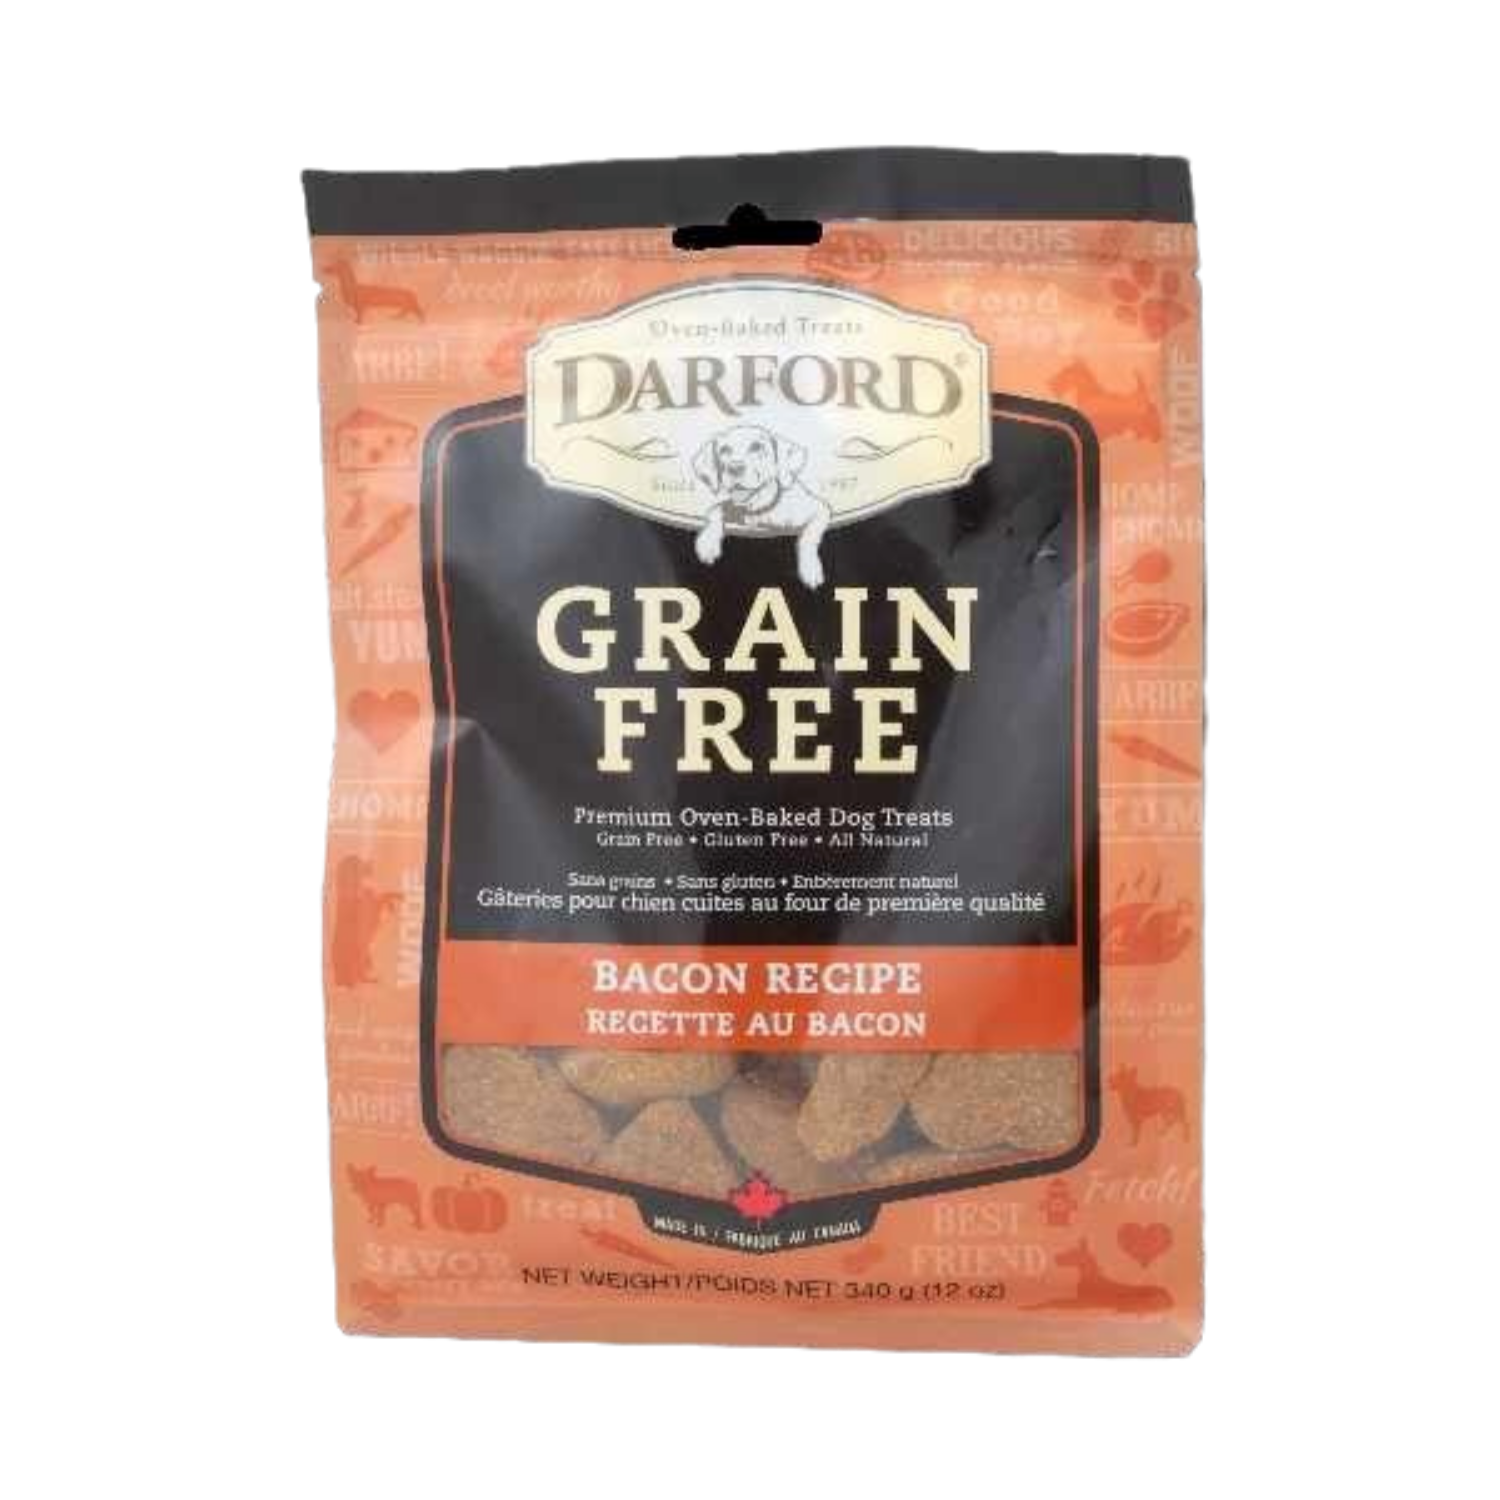 [DISCONTINUED] Darford Grain Free (Bacon) for Dogs - 170g / 340g